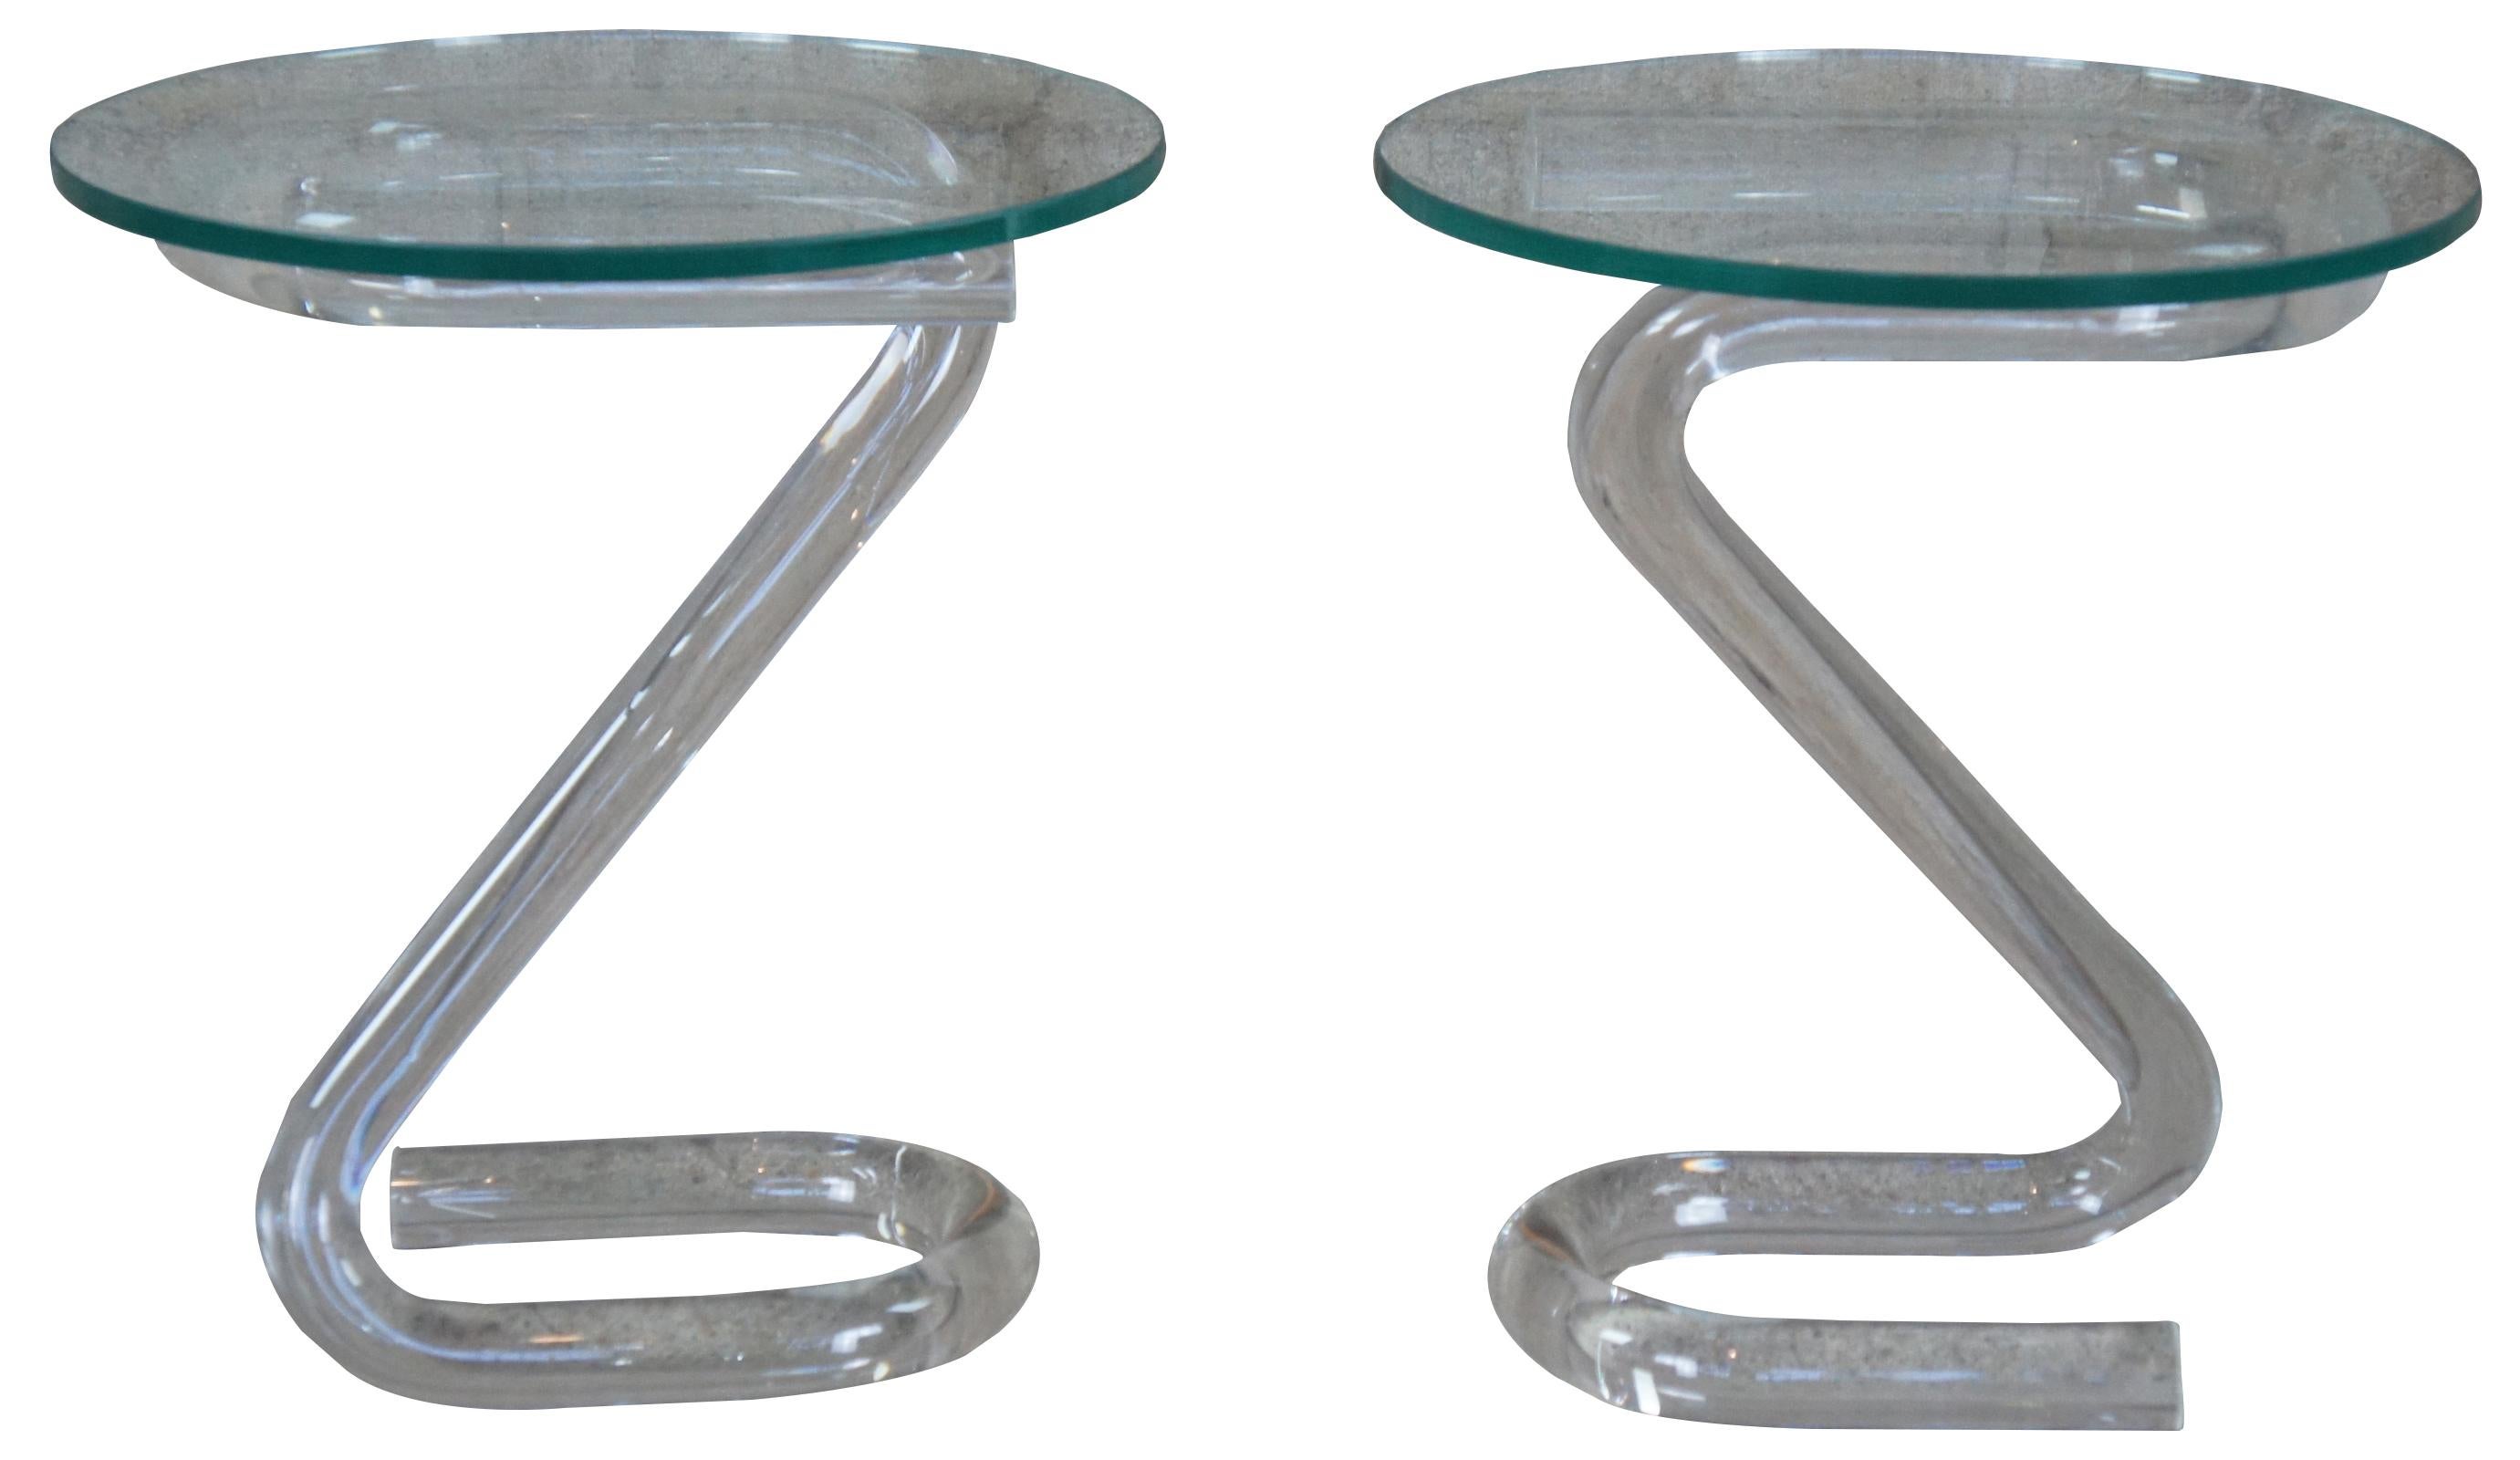 Pair of two Jeff Messerschmitt 3000 Pipe Line series Lucite and round glass tables. Made in 1975, signed on bases, #40 and #41.

Provenance: Estate of Carol Levitan and Jesse Philips
Mr. Philips was both a retailer, as an owner of a Dayton